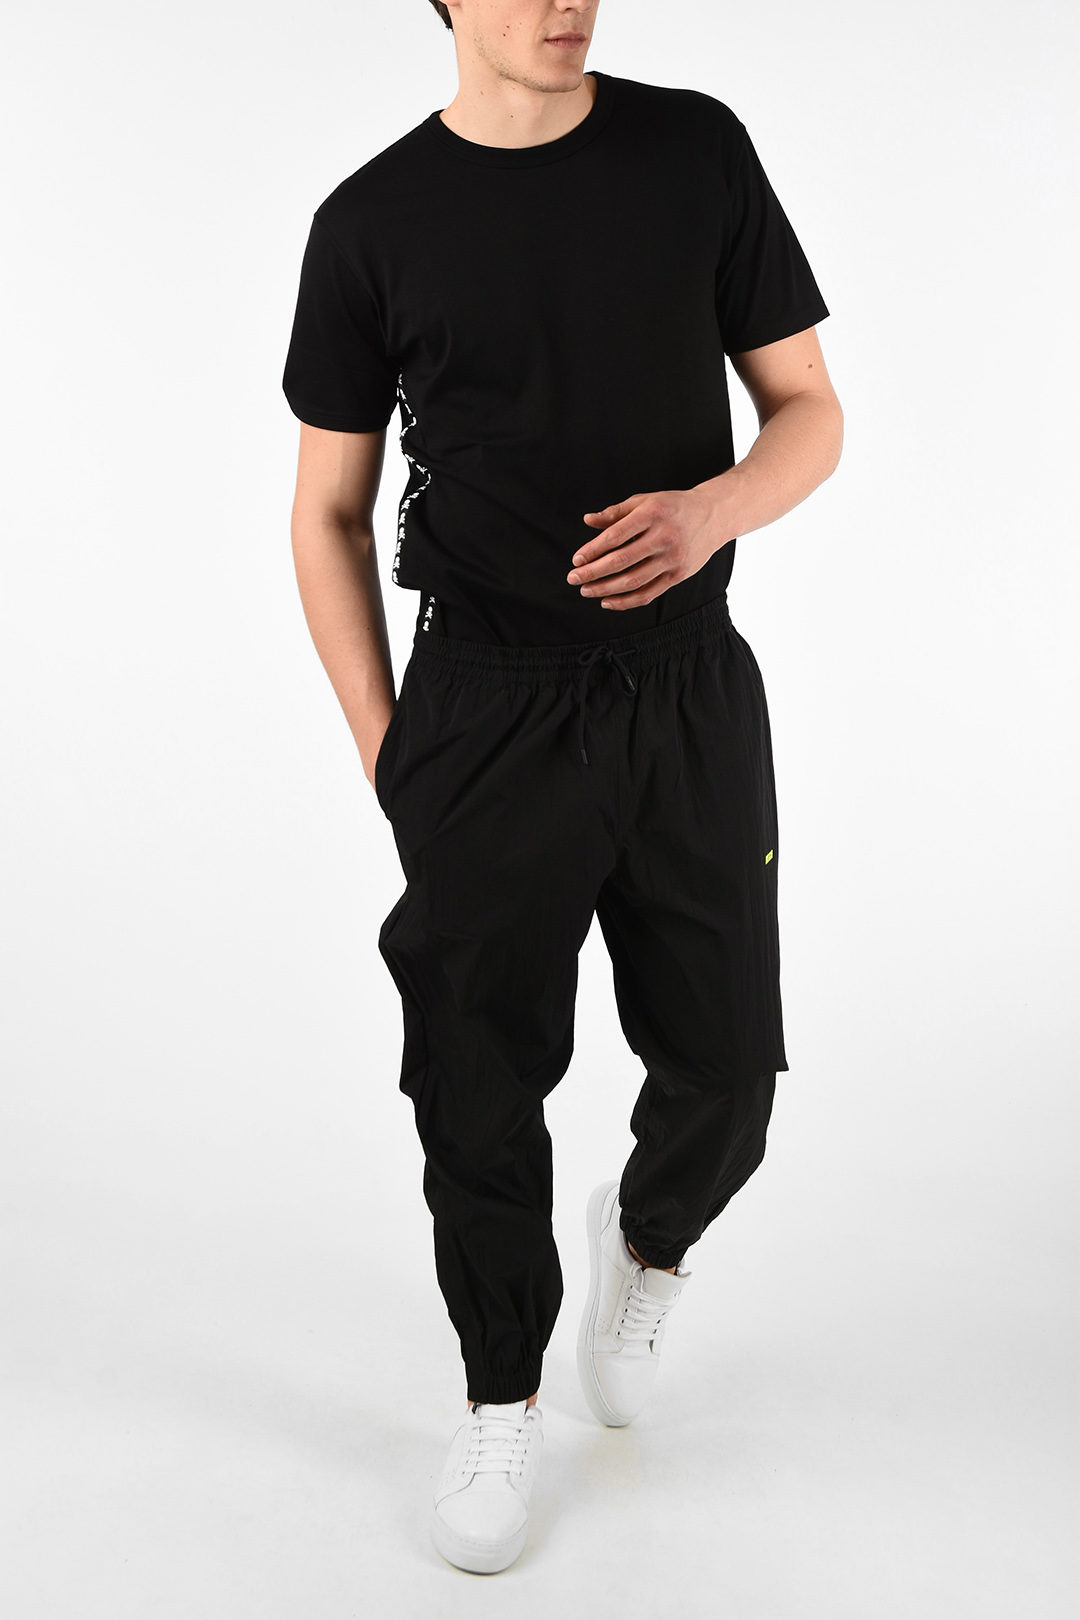 MSGM Textile Joggers with Ankle Zip men - Glamood Outlet